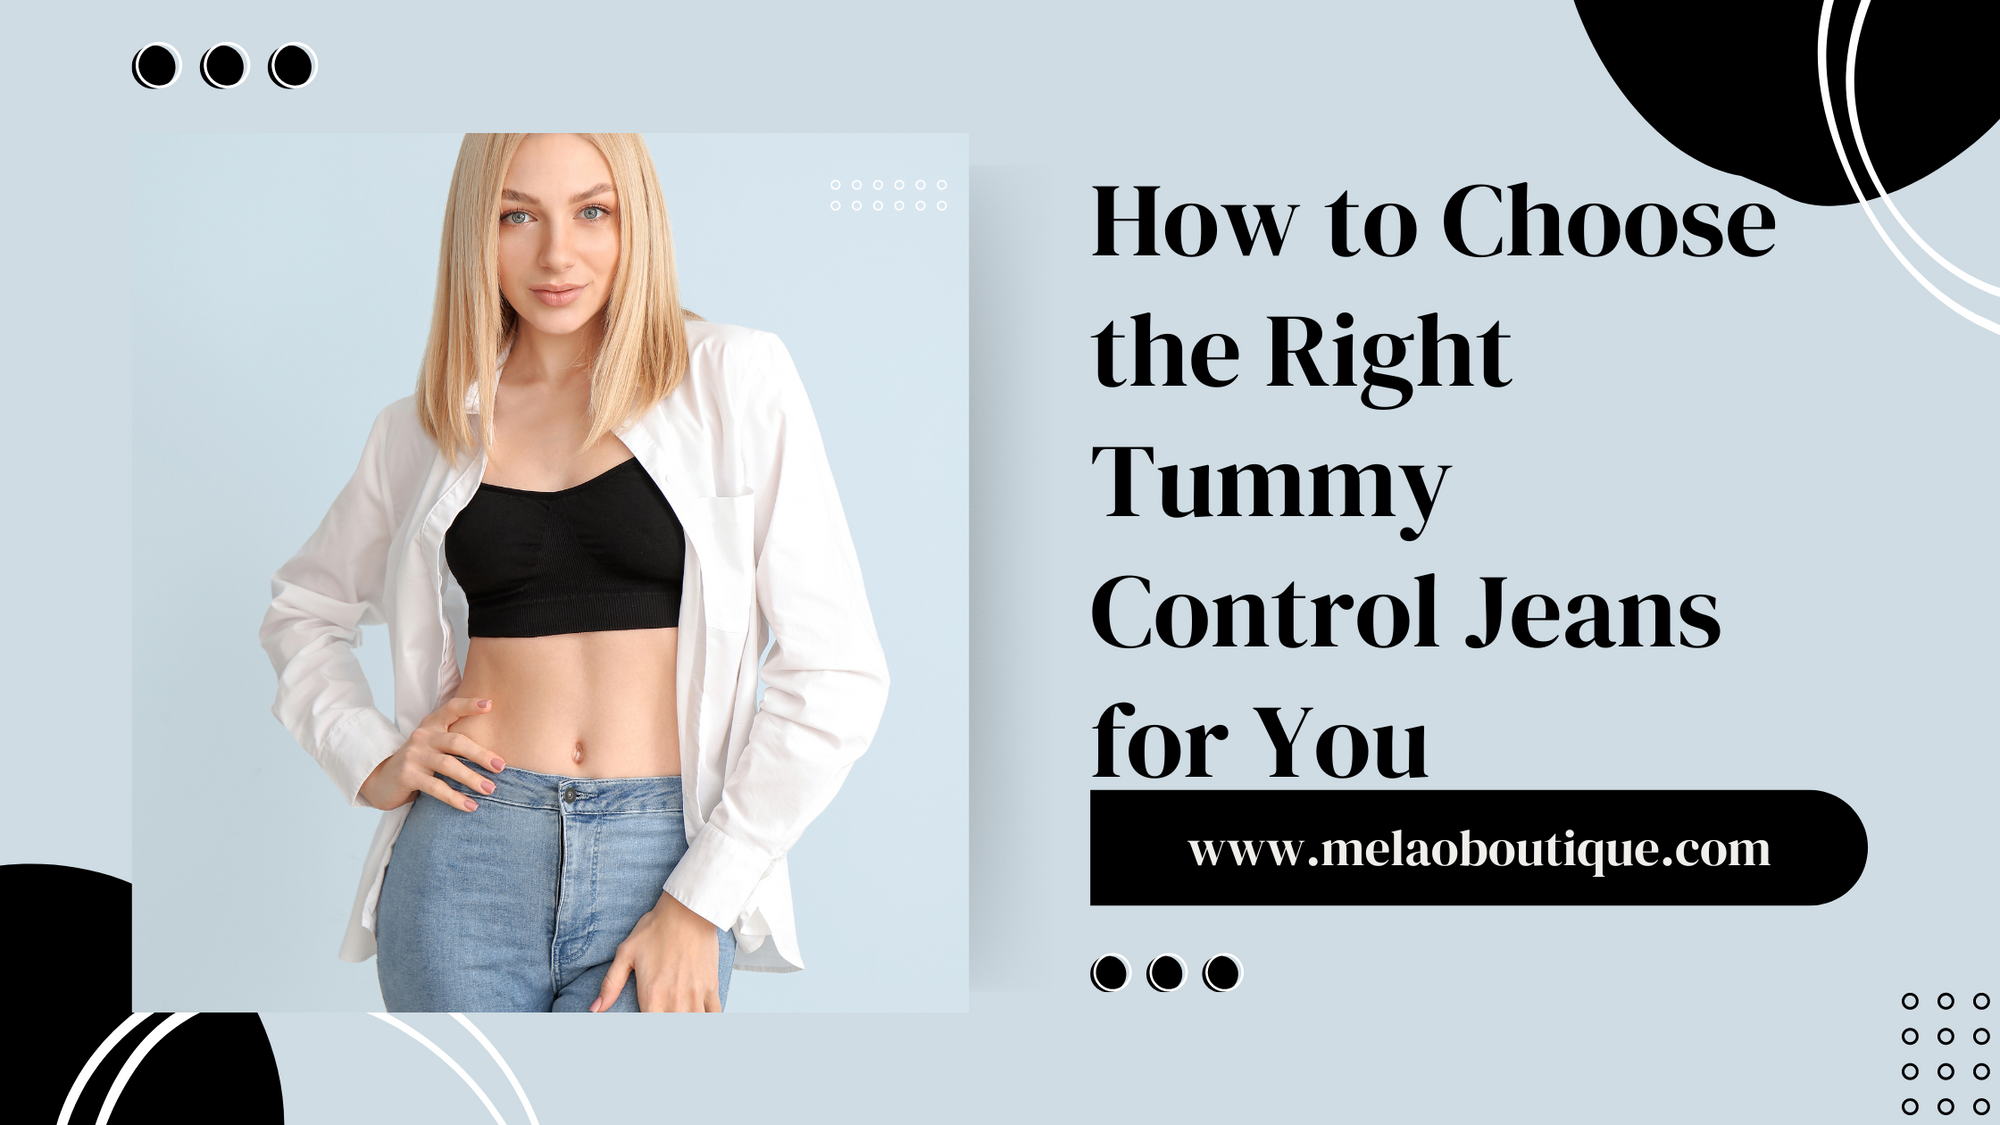 How to Choose the Right Tummy Control Jeans for You